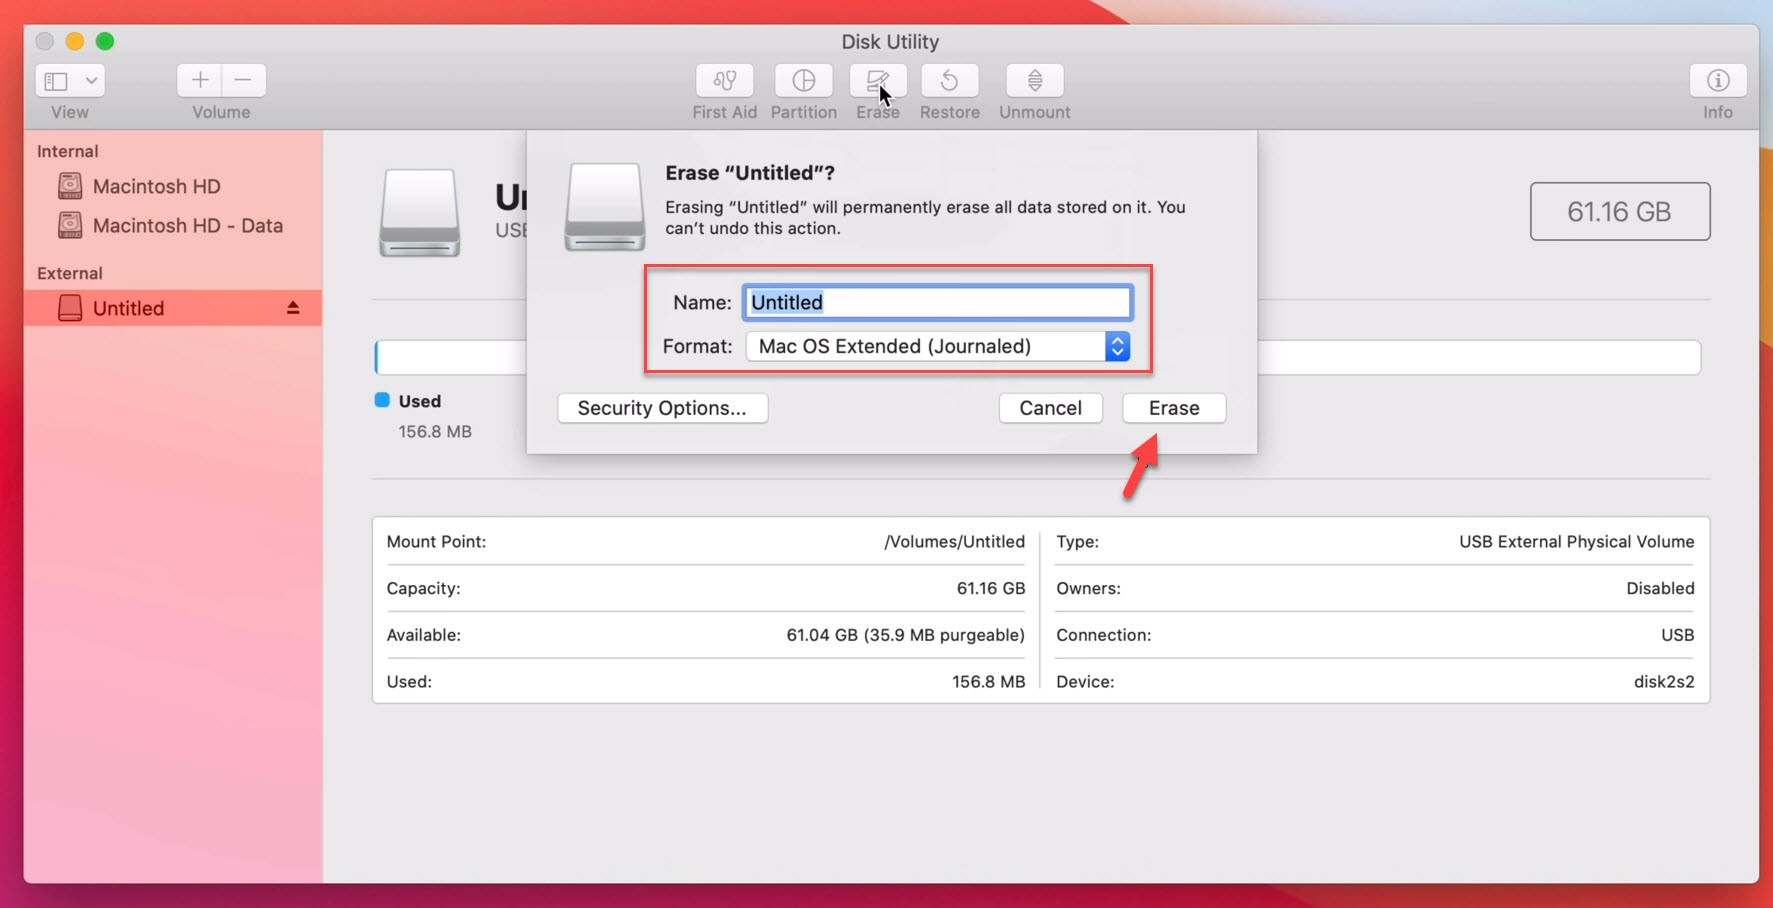 How to Format USB drive on Disk Utilty